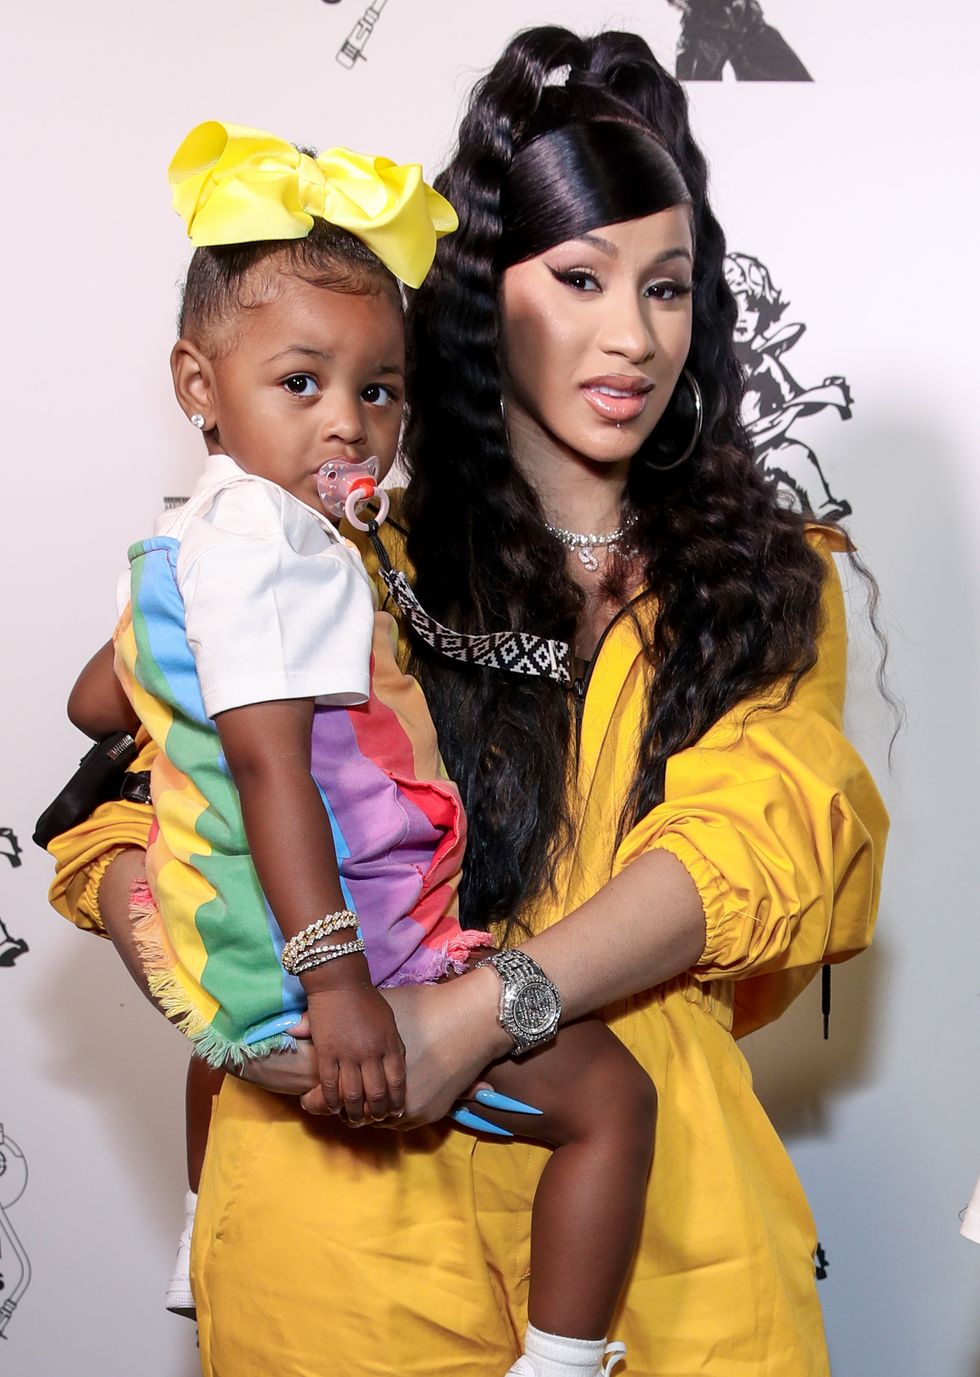 beverly hills, california   june 17 kulture kiari cephus and cardi b attend the teyana taylor the album listening party on june 17, 2020 in beverly hills, california photo by rich furygetty images for def jam recordings